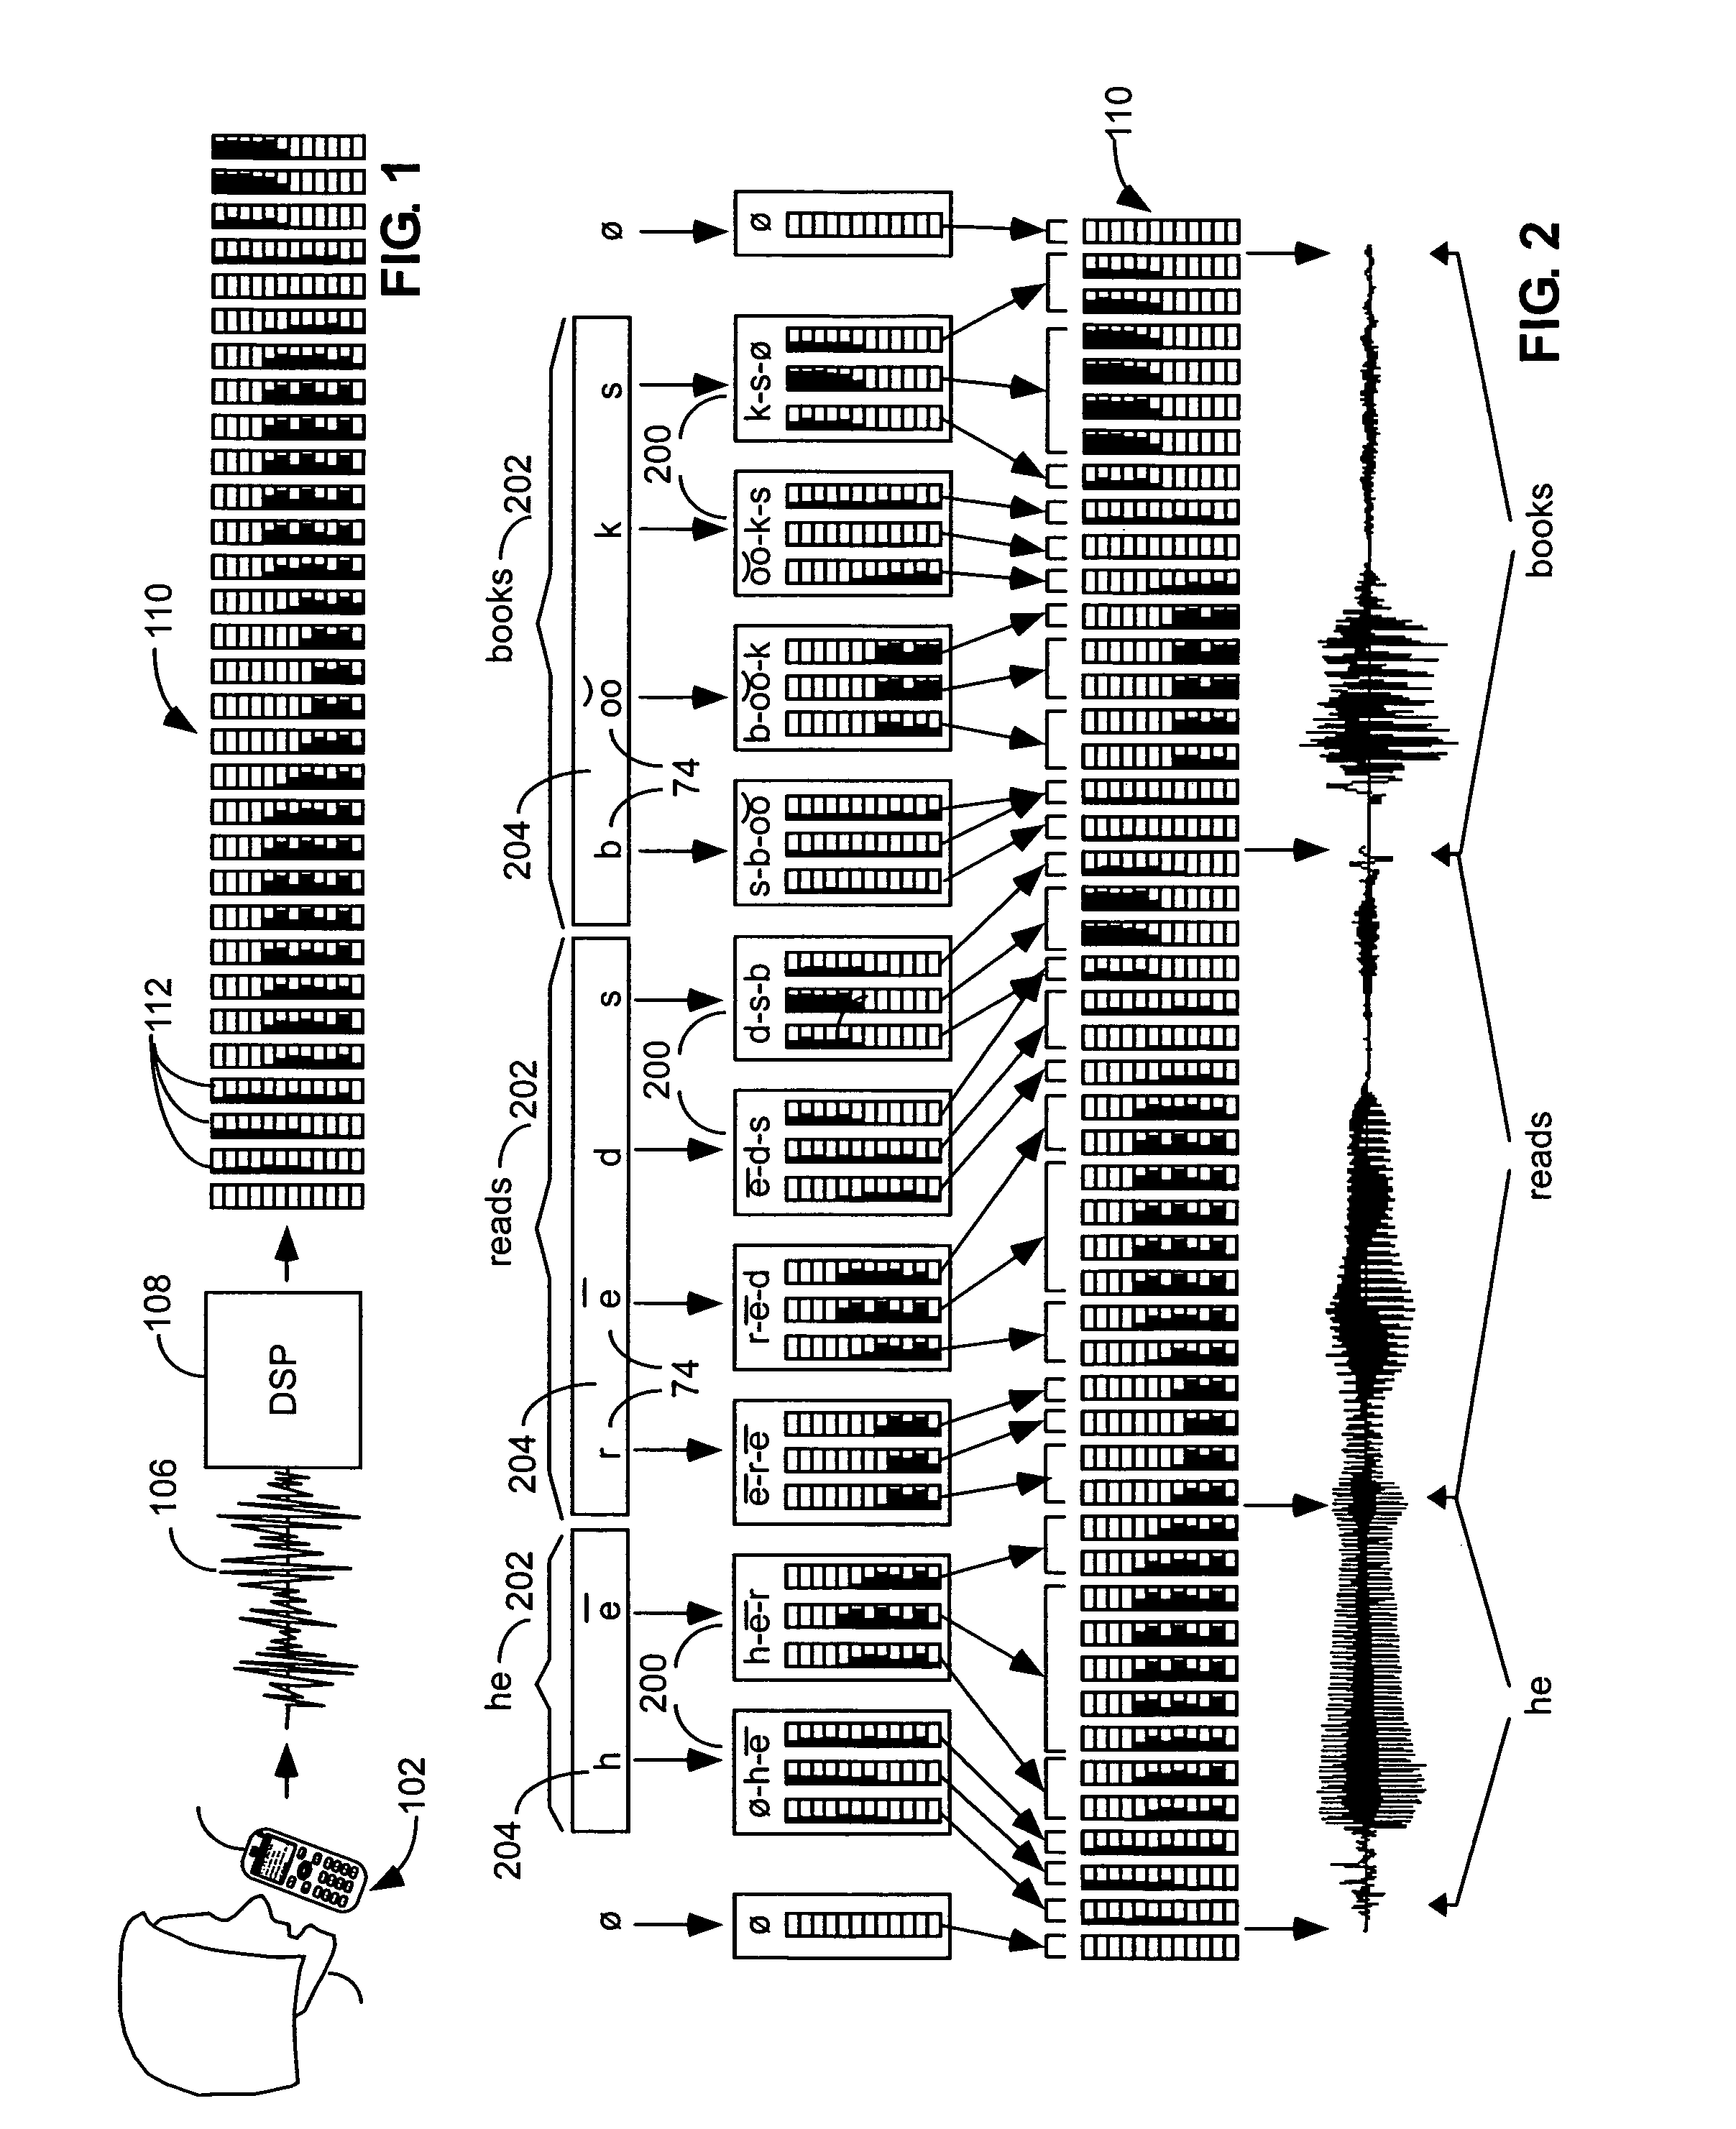 Combined speech recognition and text-to-speech generation